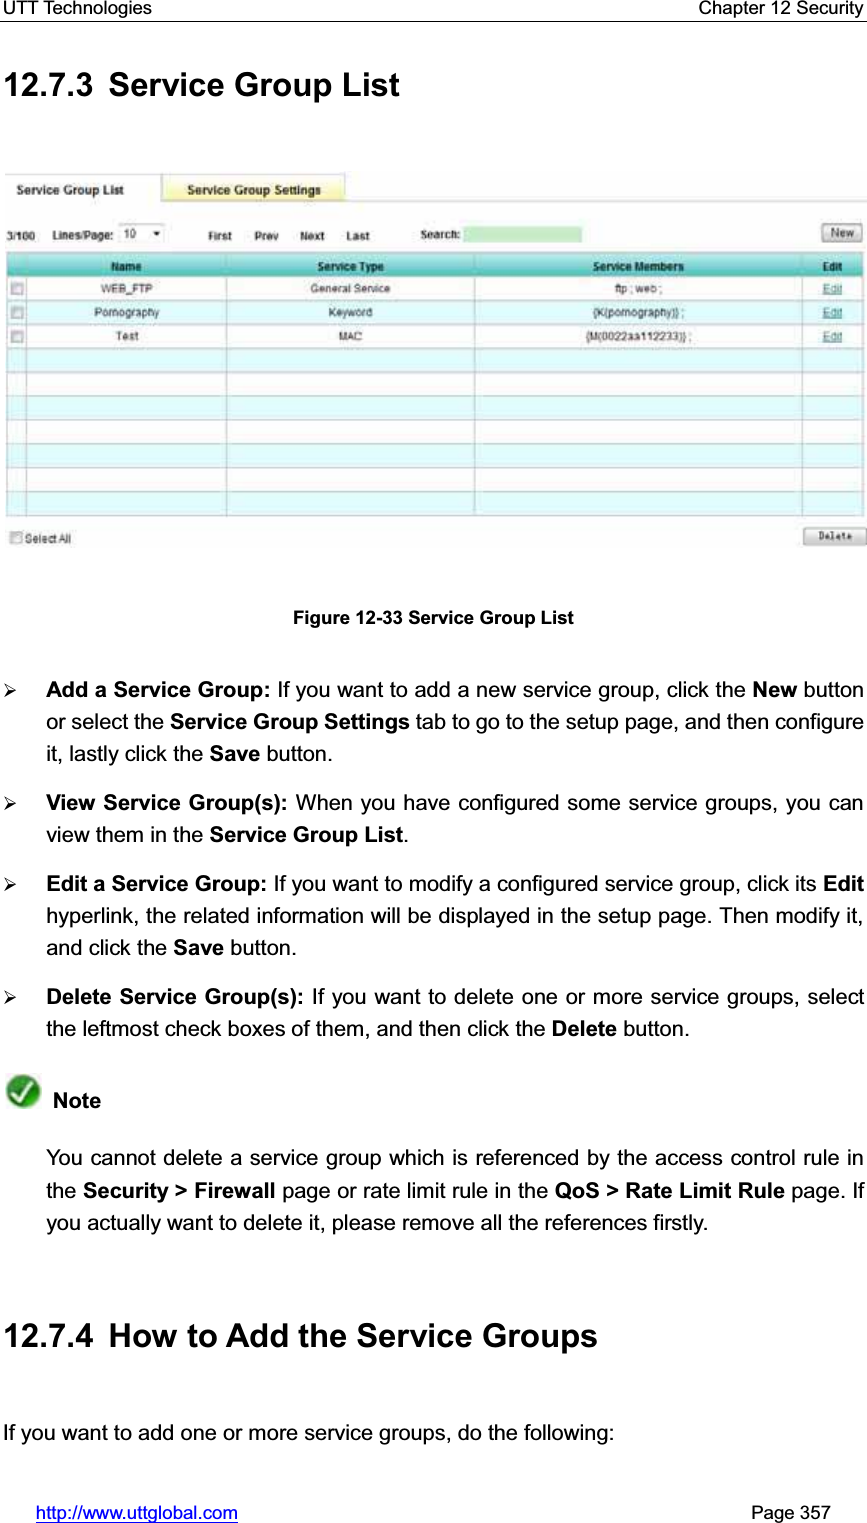 UTT Technologies    Chapter 12 Security   http://www.uttglobal.com                                                       Page 357 12.7.3  Service Group List Figure 12-33 Service Group List¾Add a Service Group: If you want to add a new service group, click the New button or select the Service Group Settings tab to go to the setup page, and then configure it, lastly click the Save button. ¾View Service Group(s): When you have configured some service groups, you can view them in the Service Group List.¾Edit a Service Group: If you want to modify a configured service group, click its Edithyperlink, the related information will be displayed in the setup page. Then modify it, and click the Save button. ¾Delete Service Group(s): If you want to delete one or more service groups, select the leftmost check boxes of them, and then click the Delete button.  NoteYou cannot delete a service group which is referenced by the access control rule in the Security &gt; Firewall page or rate limit rule in the QoS &gt; Rate Limit Rule page. If you actually want to delete it, please remove all the references firstly. 12.7.4  How to Add the Service Groups If you want to add one or more service groups, do the following:   